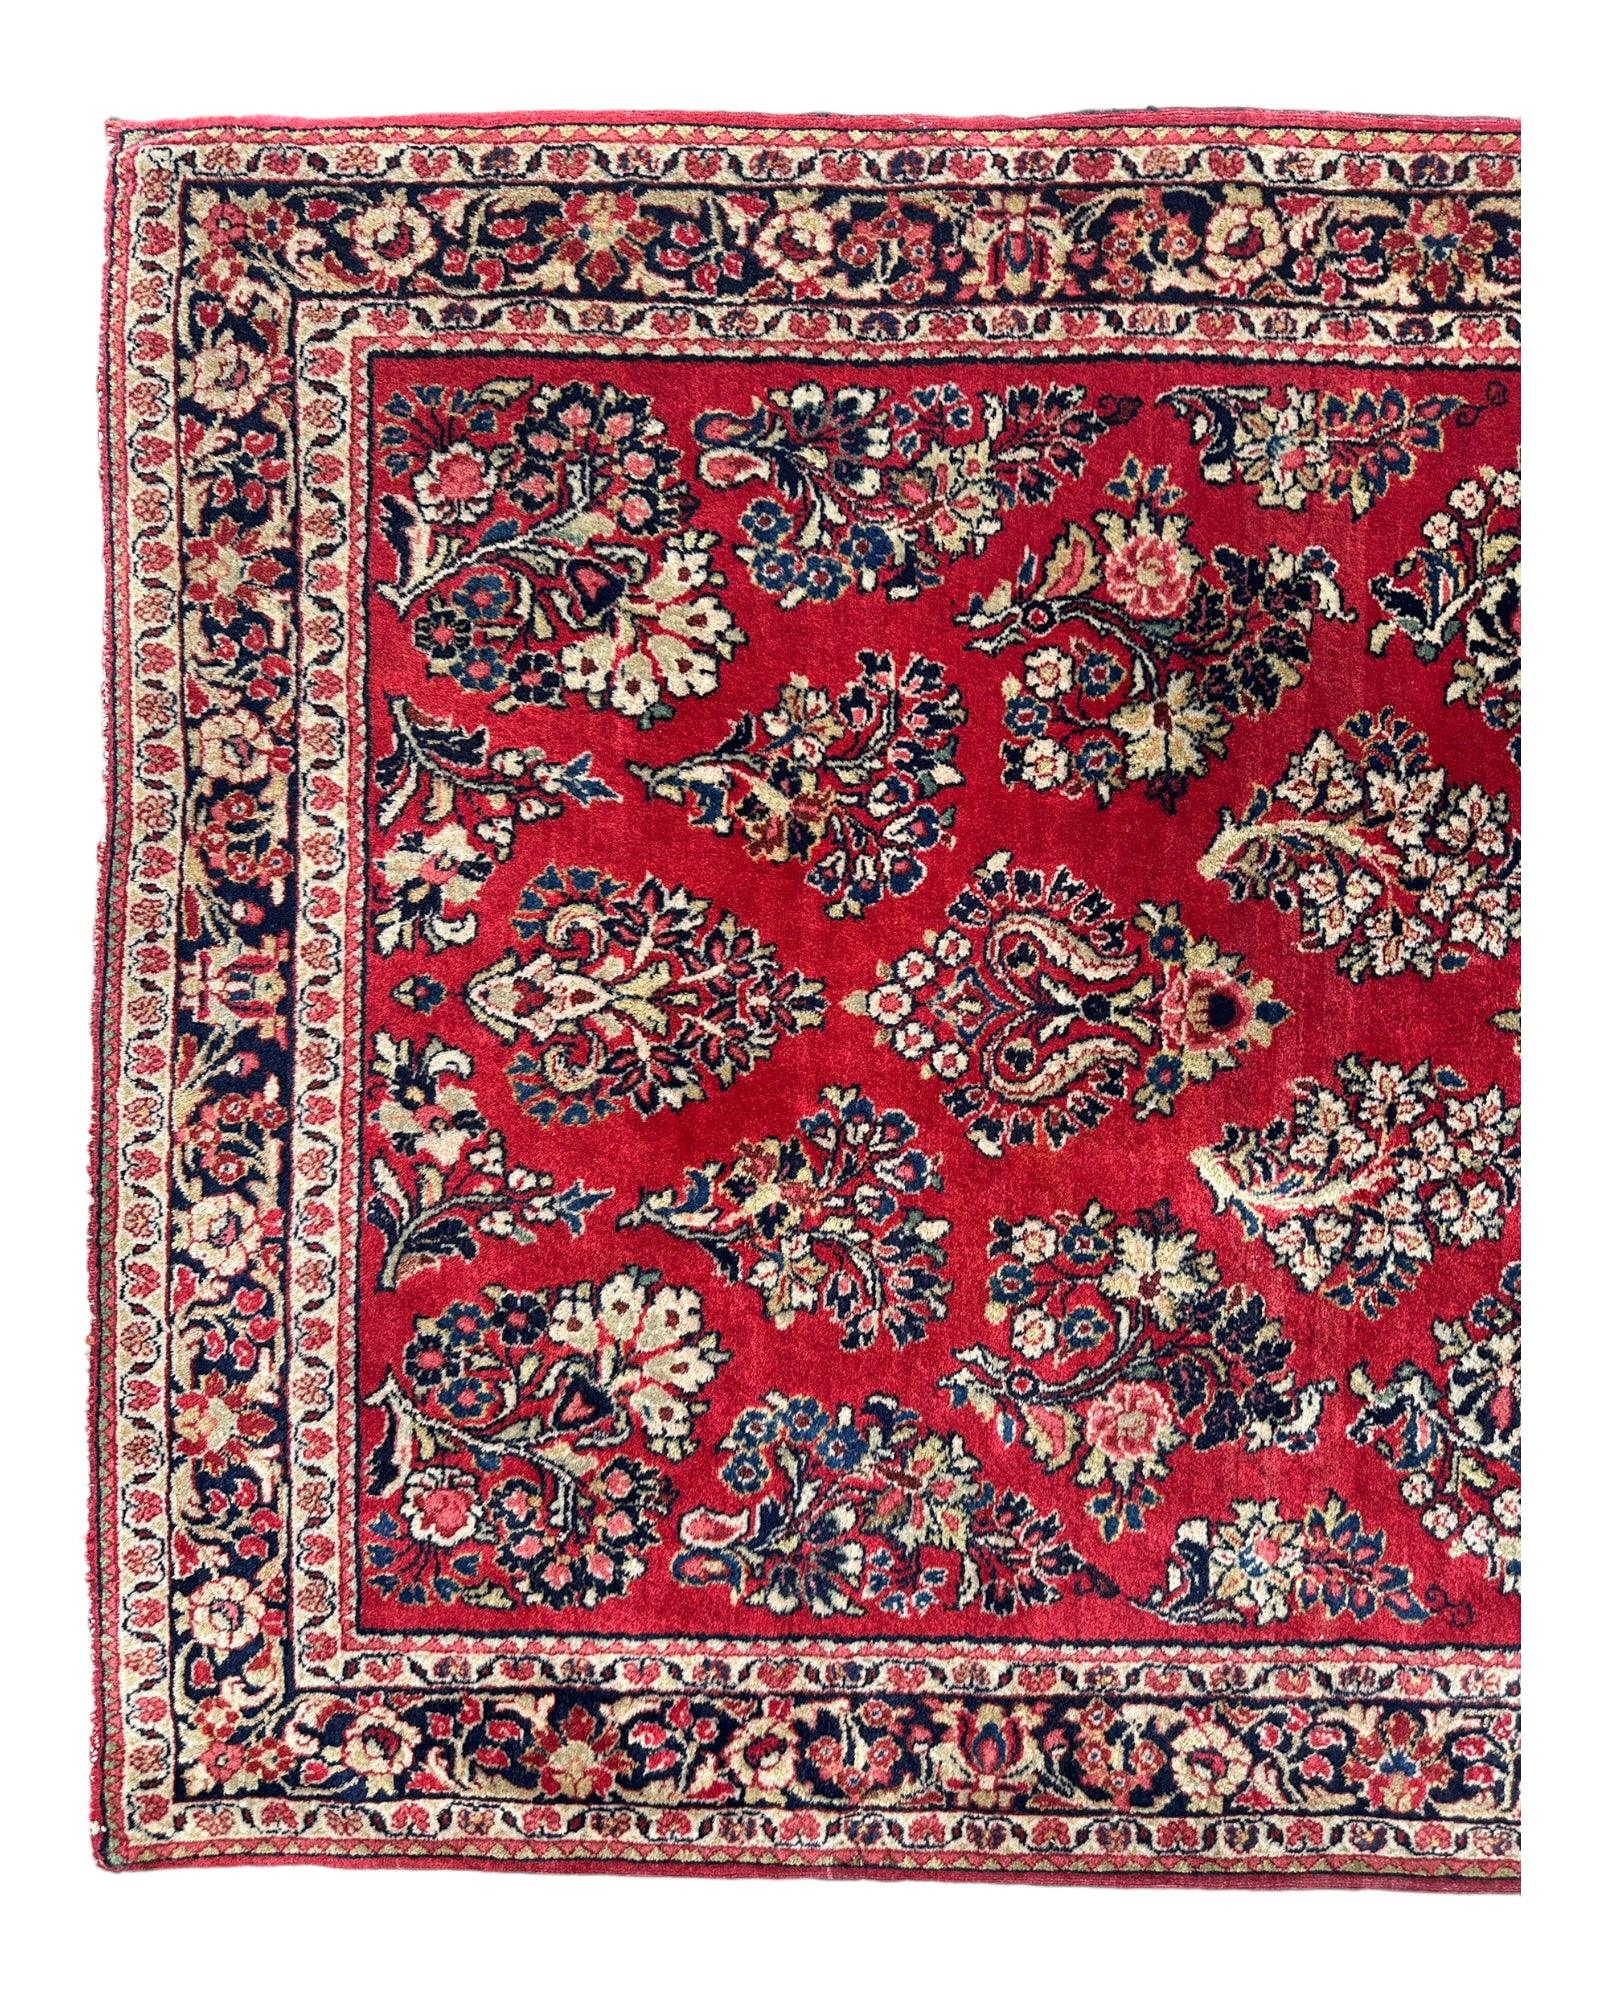 Antique Hand-Knotted Persian Sarouk Runner Rug 3’4 x 6’5